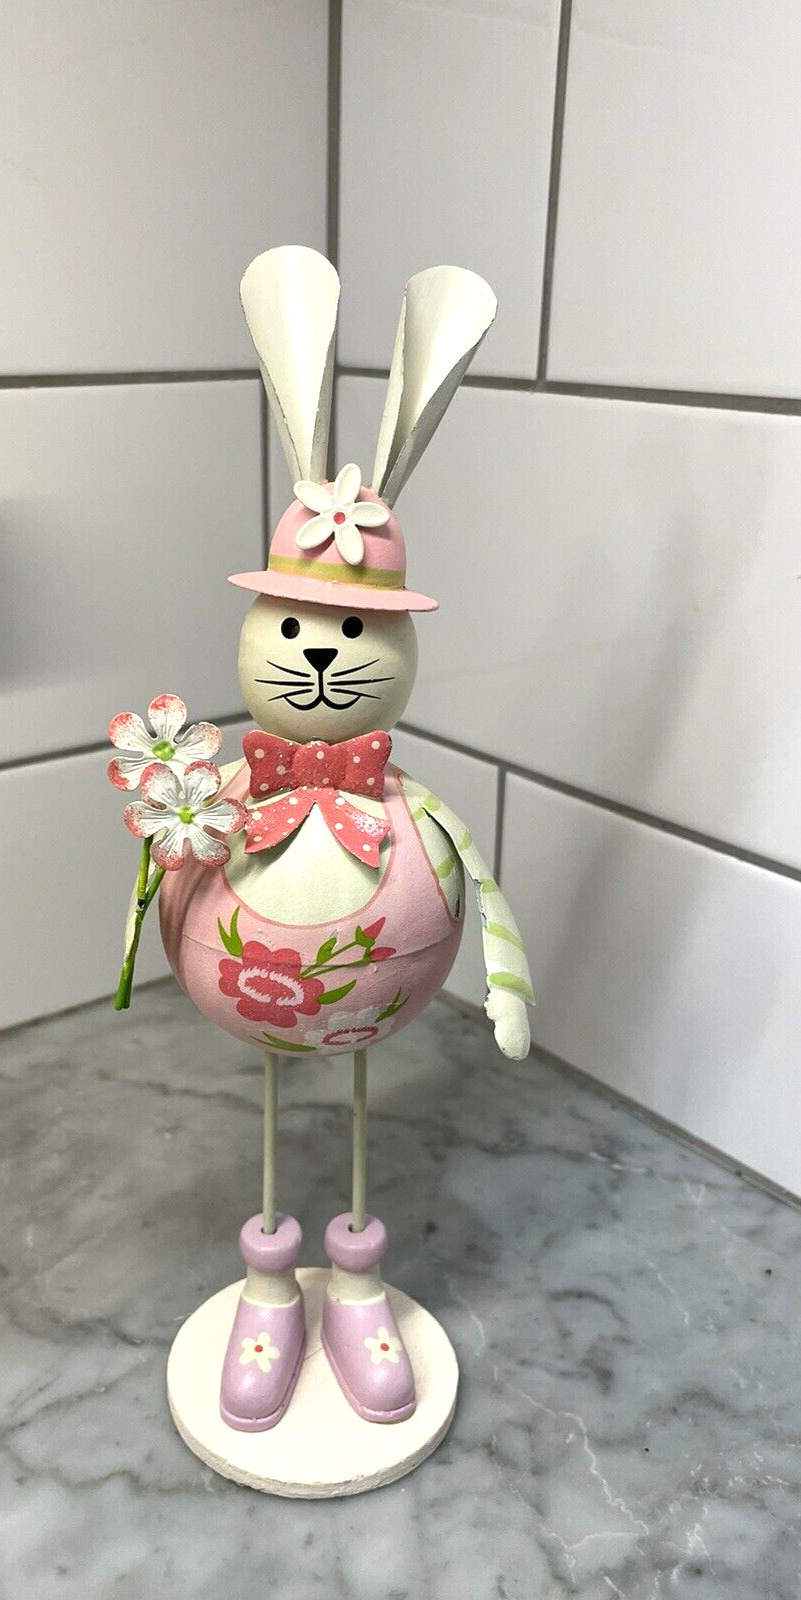 Adorable Metal Dancing Bunny All Ready For Easter